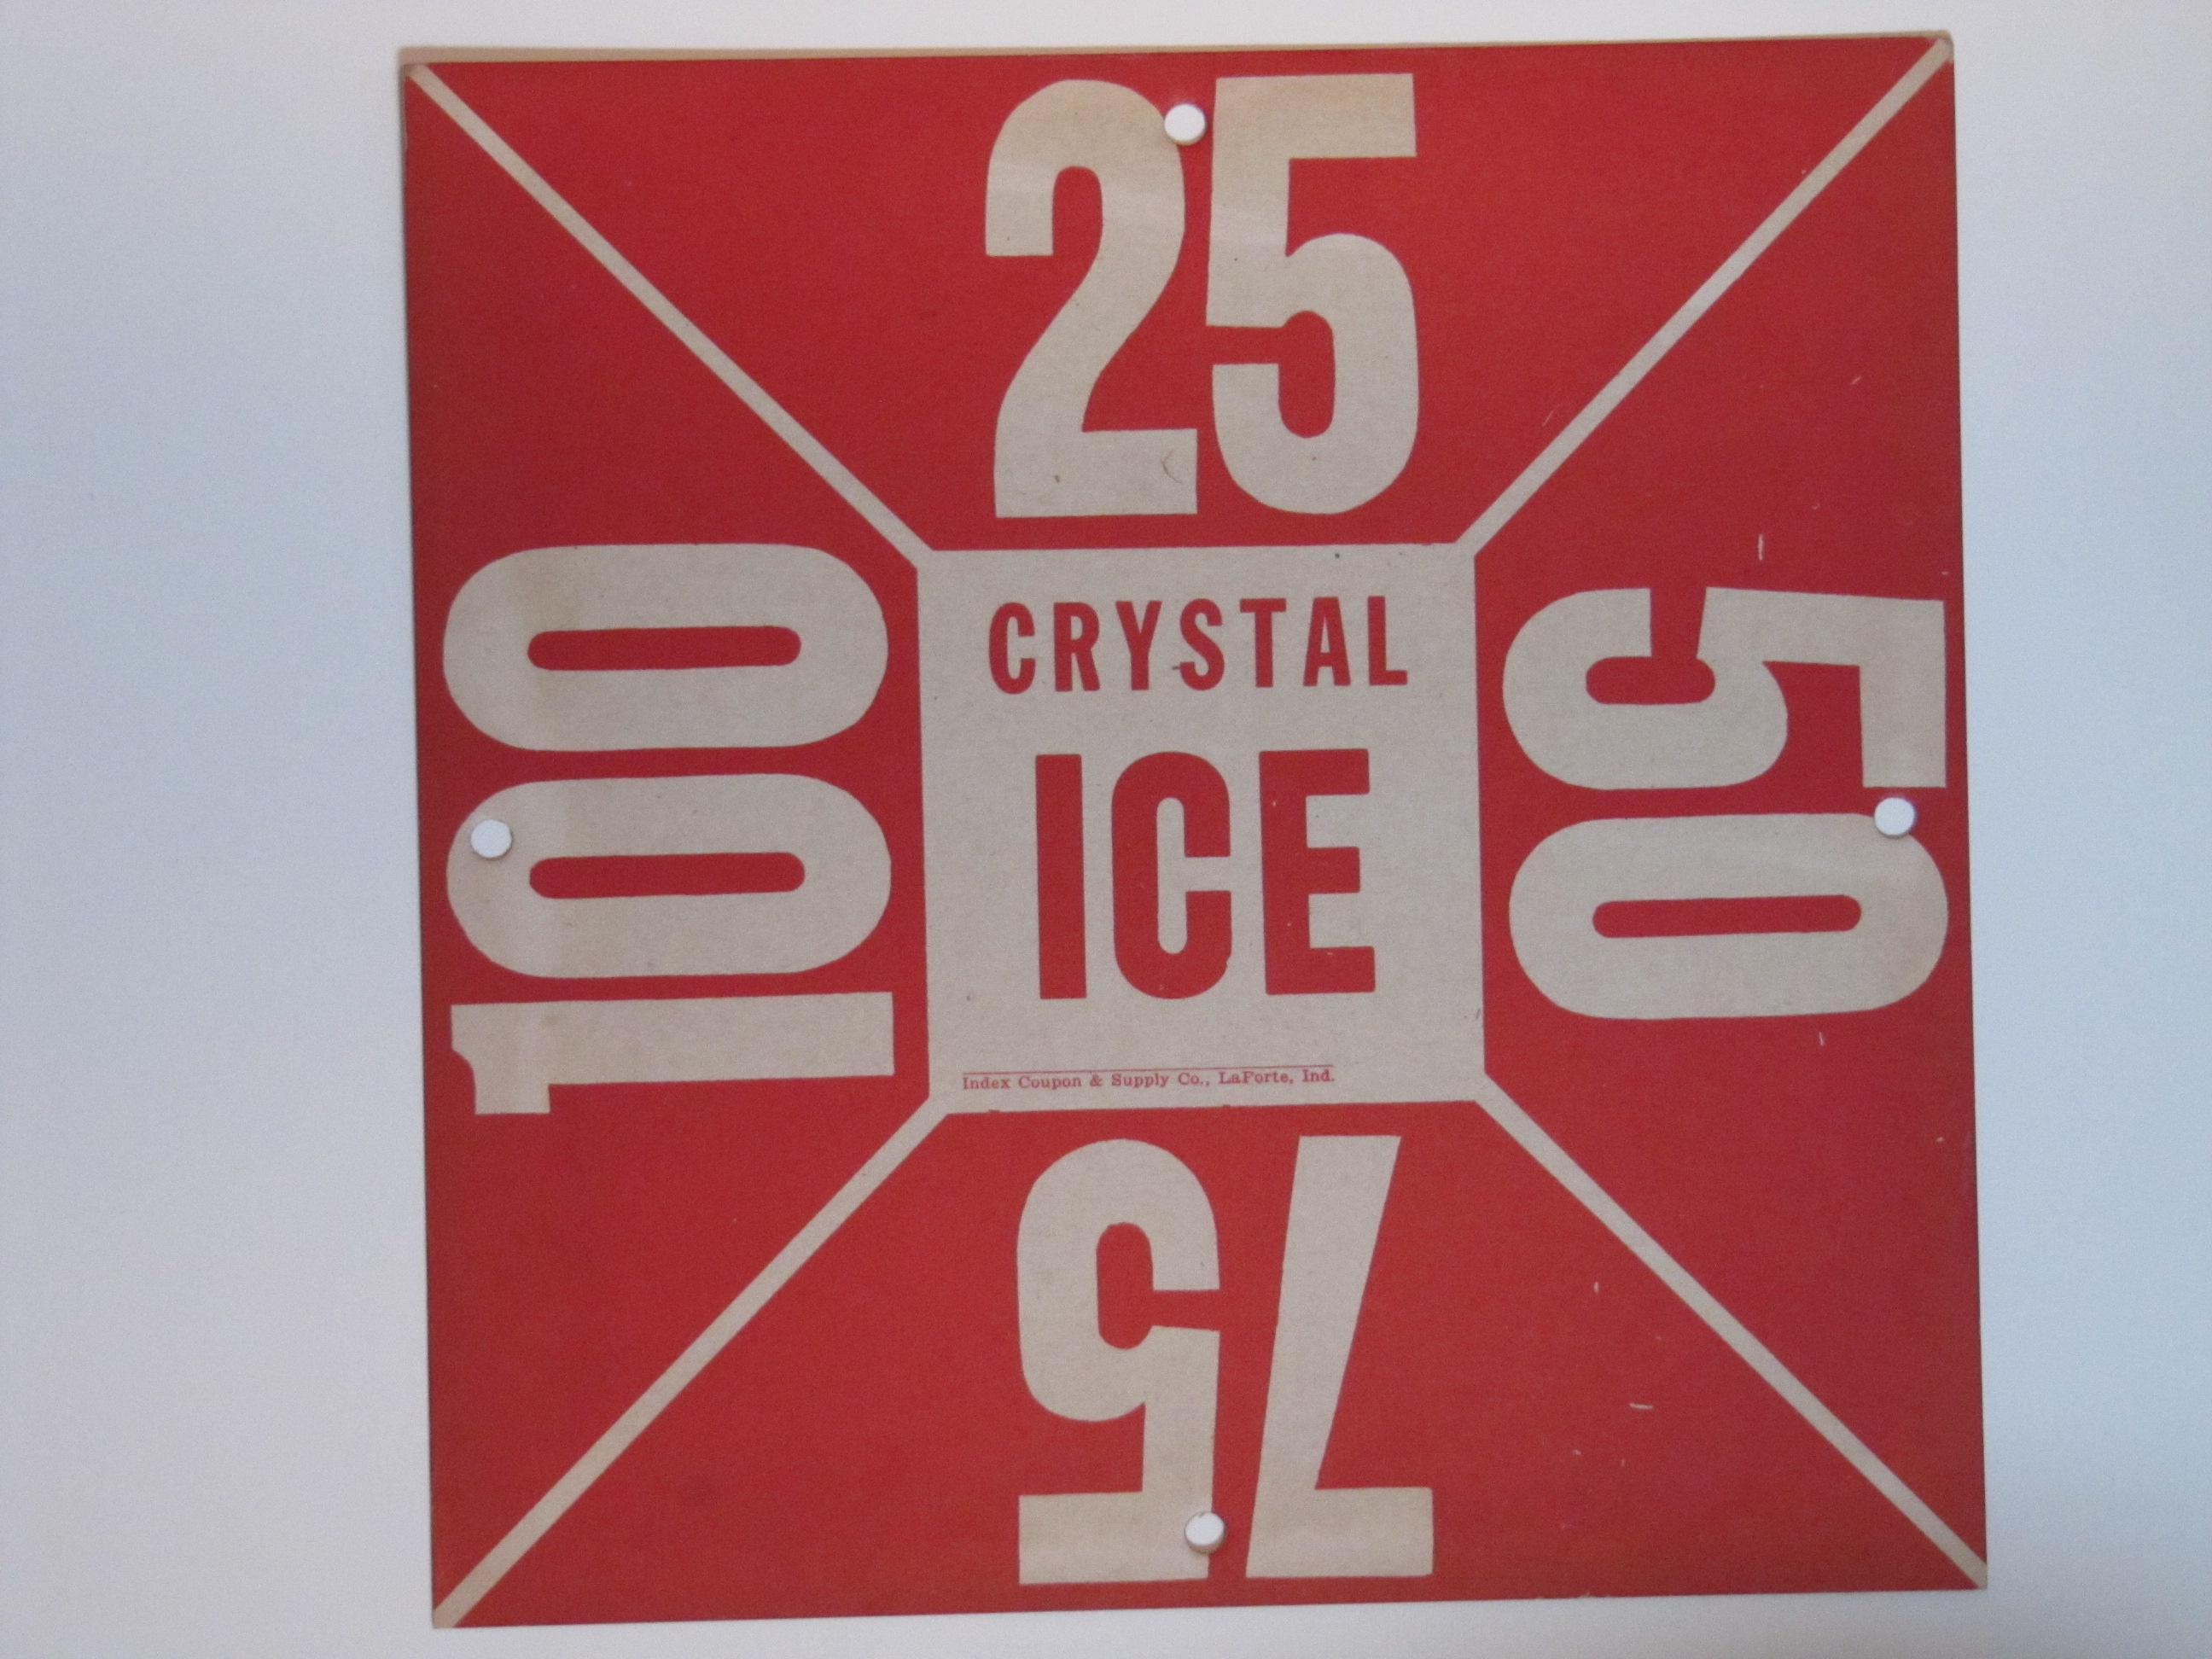 Crystal Ice square